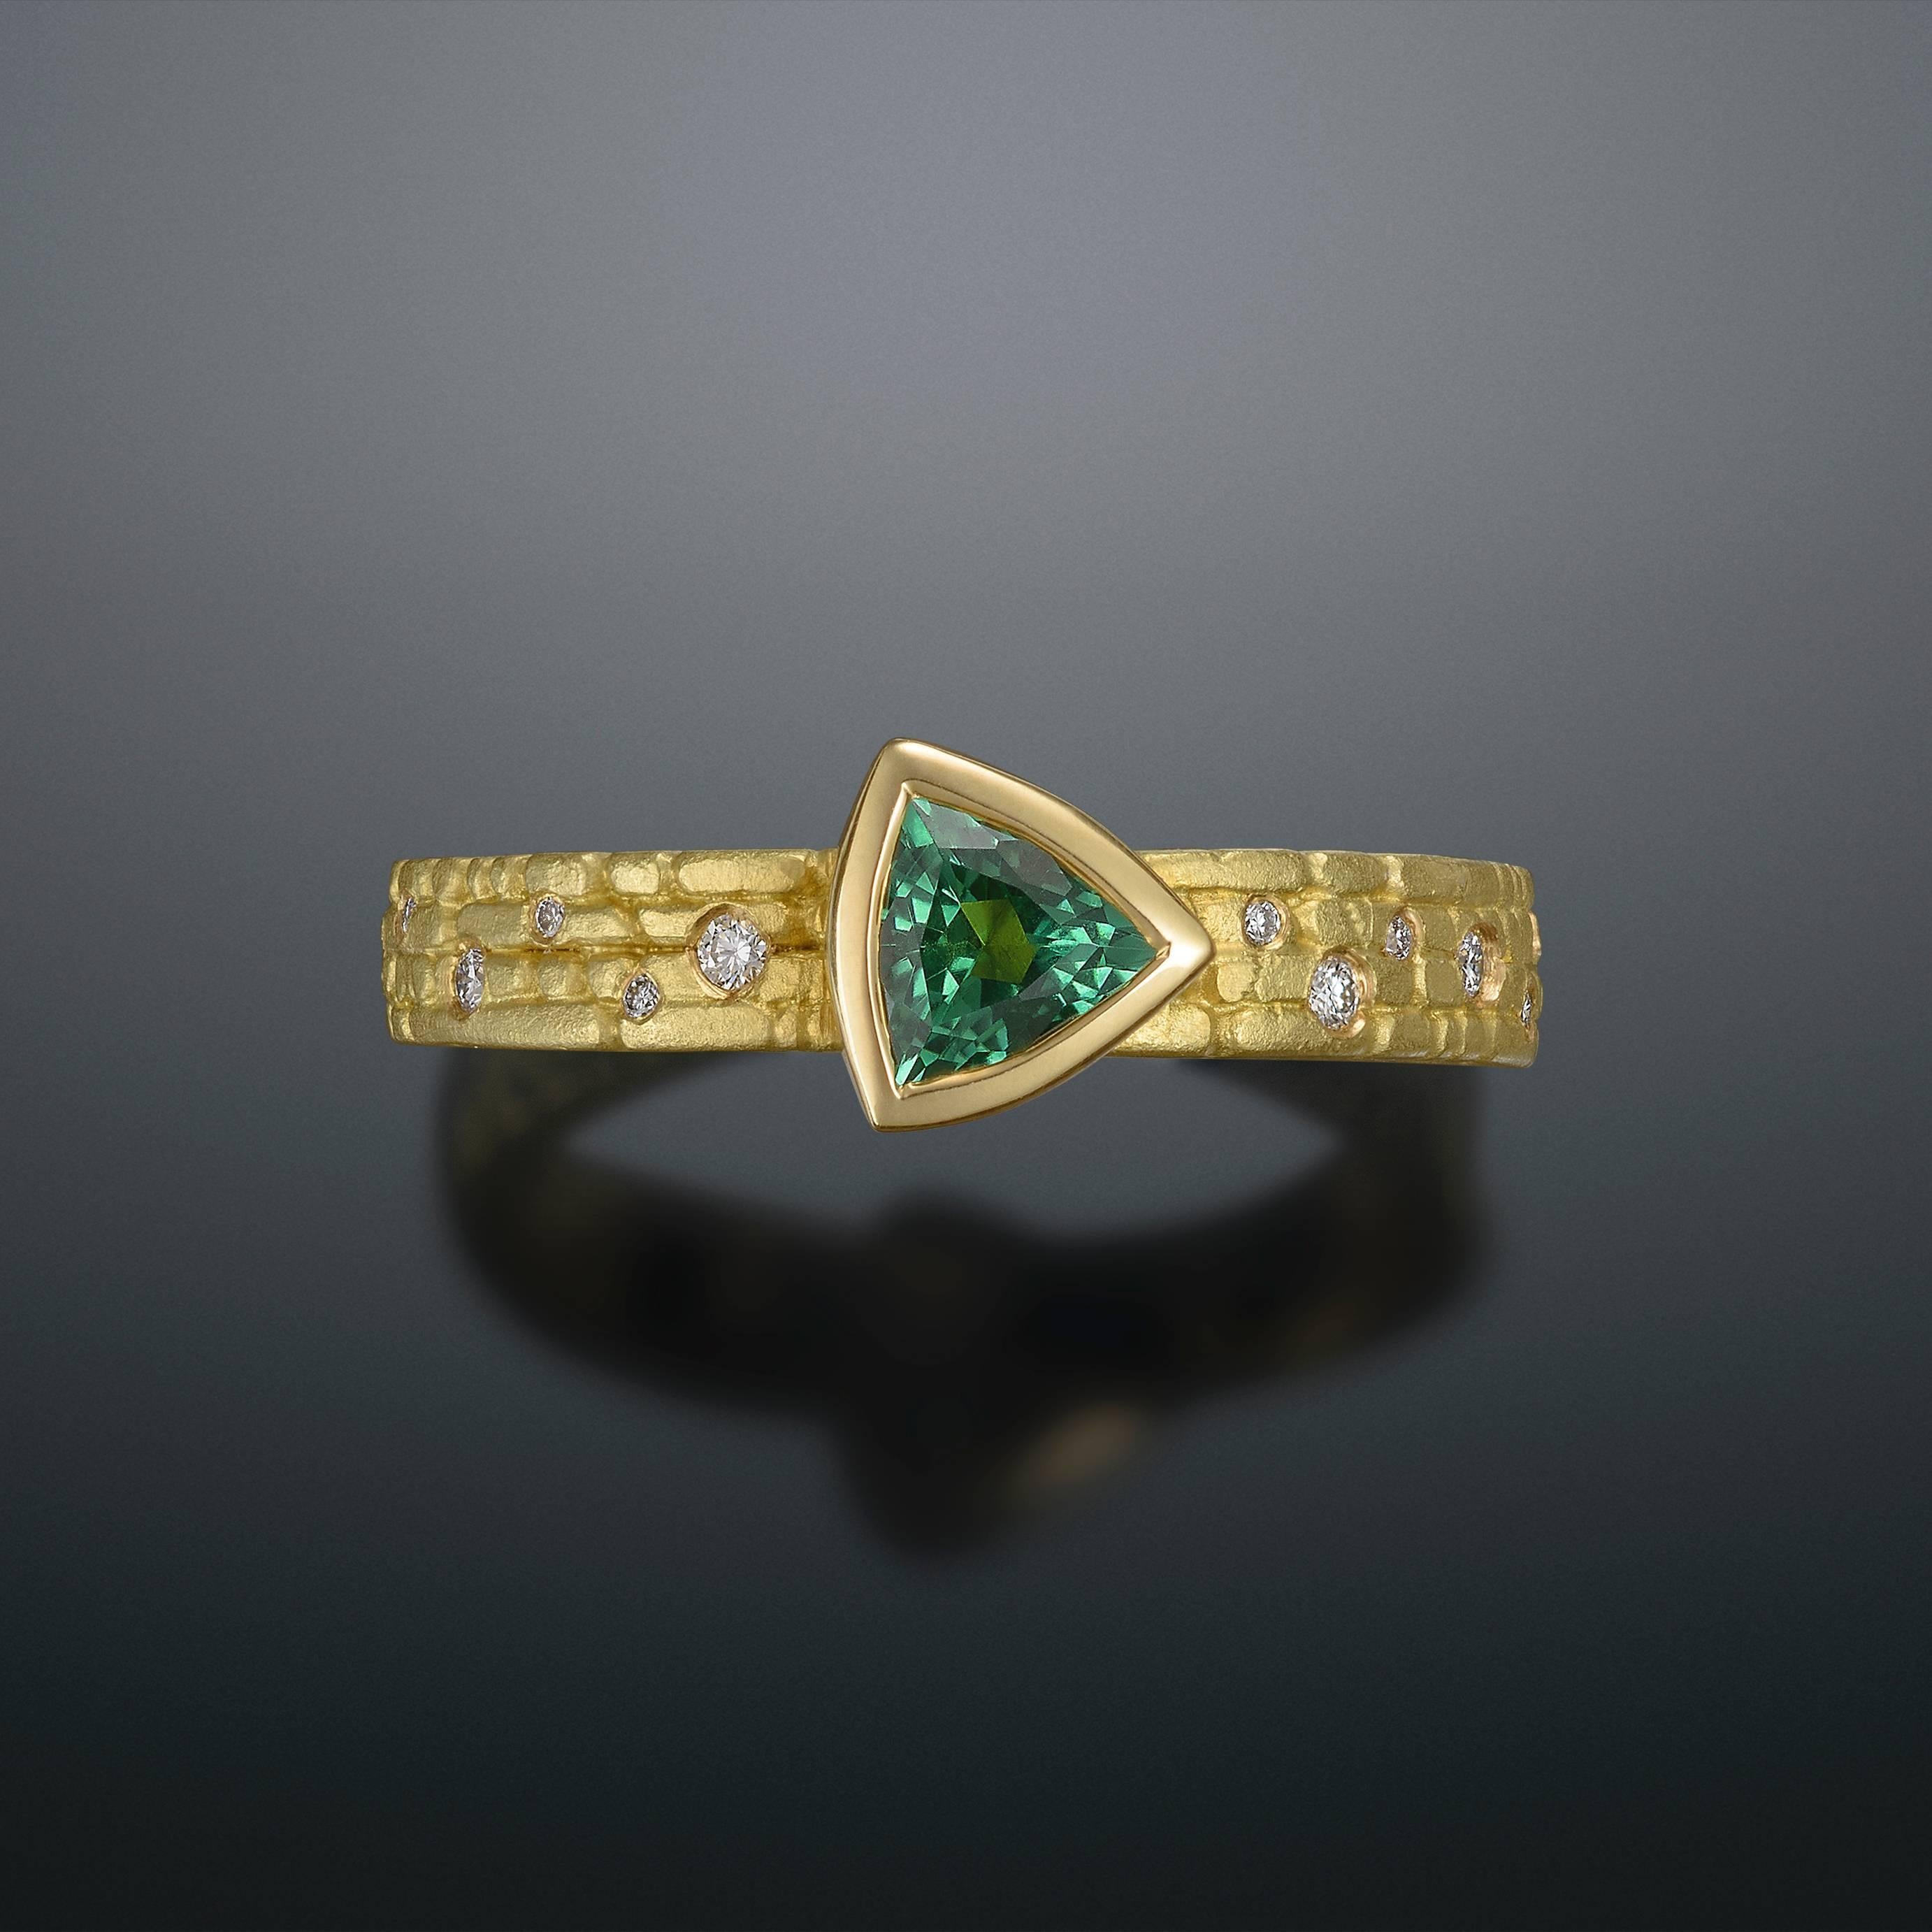 18kt cobbled Gold ring with blue-green Trillion Usakos Tourmaline and diamonds.

Ring is size 6.5, but can be resized.

* Each piece is designed and crafted entirely by hand in the traditional way, using age old techniques and processes.